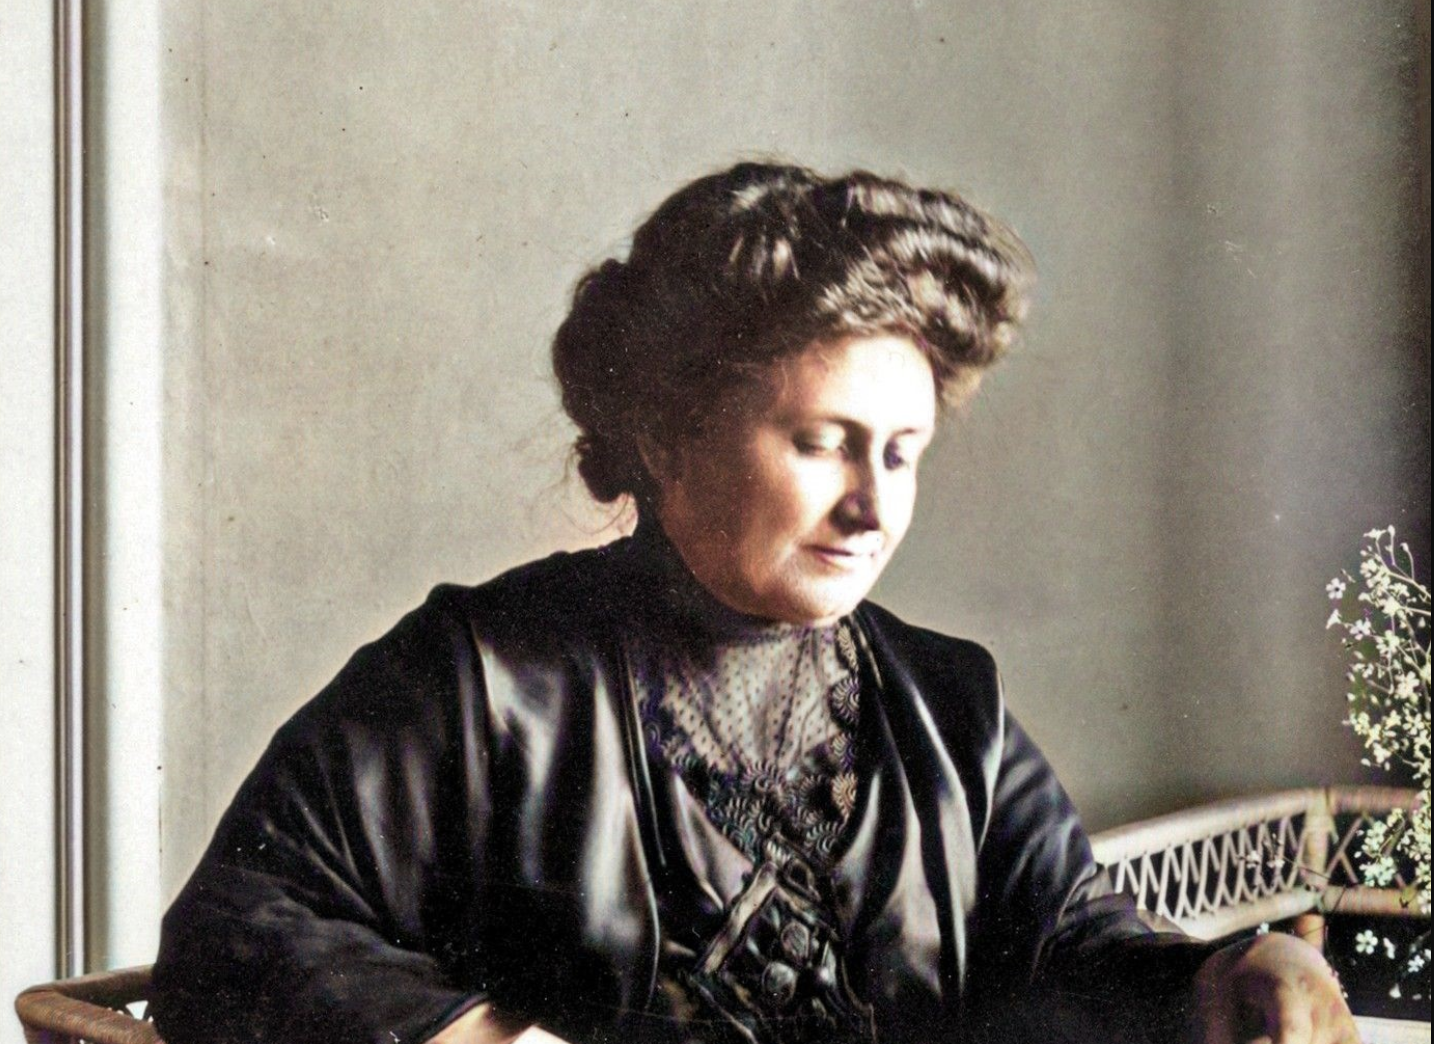 Maria Montessori in a black dress, hair pinned up, looking down at a book she is reading. 